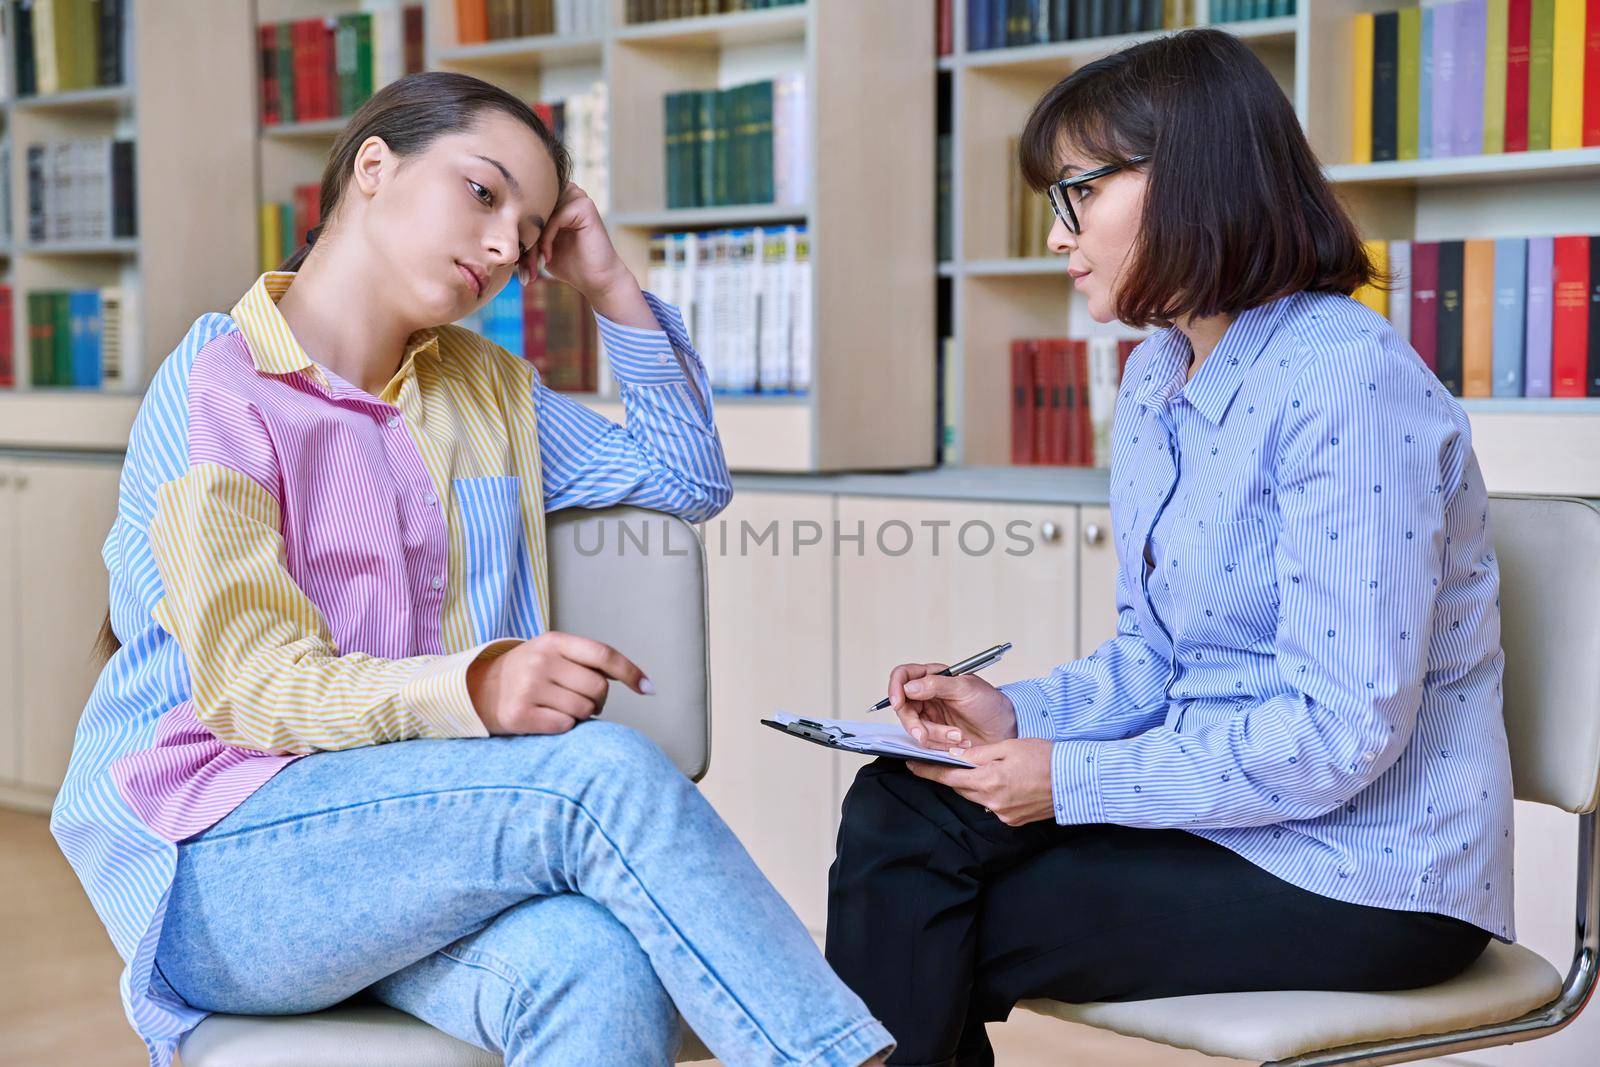 Psychologist, teacher, behavior, high school counselor counseling teenage student in library, office. Psychological help, social work, mental health, adolescence, youth psychotherapy psychology concept